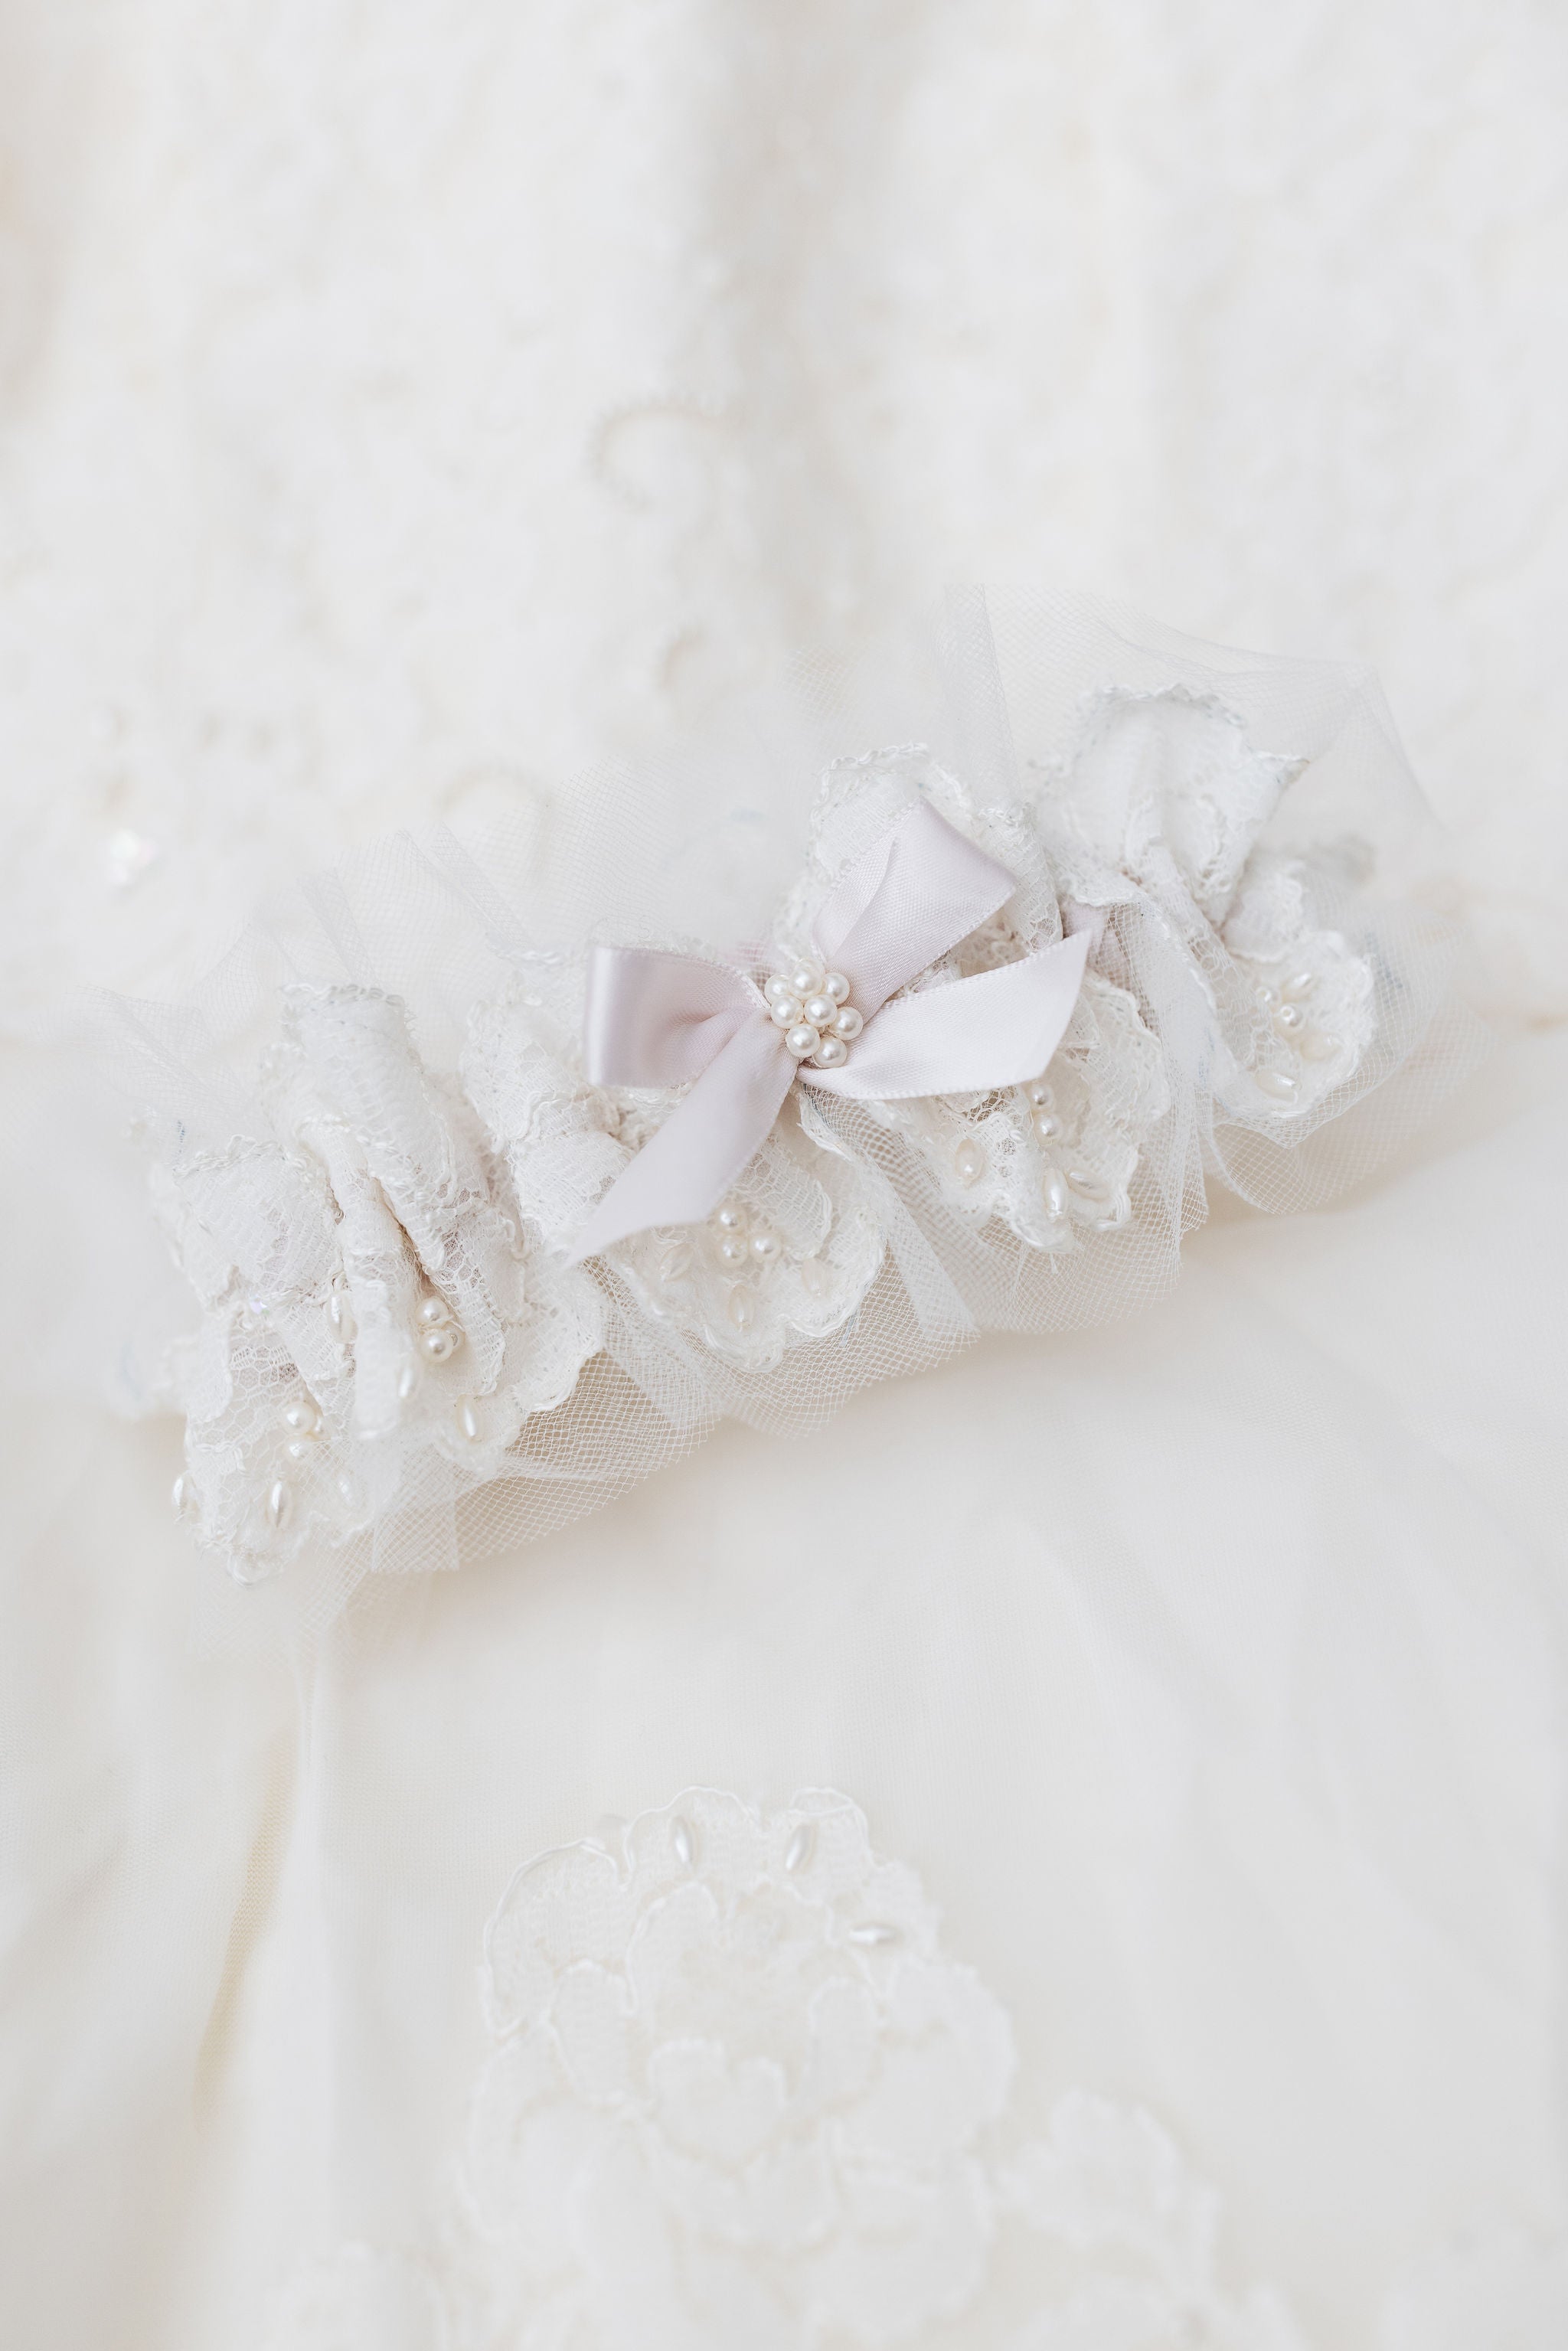 wedding garter set made from mothers wedding dress with pearls, lace, blush accents and personalized embroidery - a handmade wedding heirloom by The Garter Girl